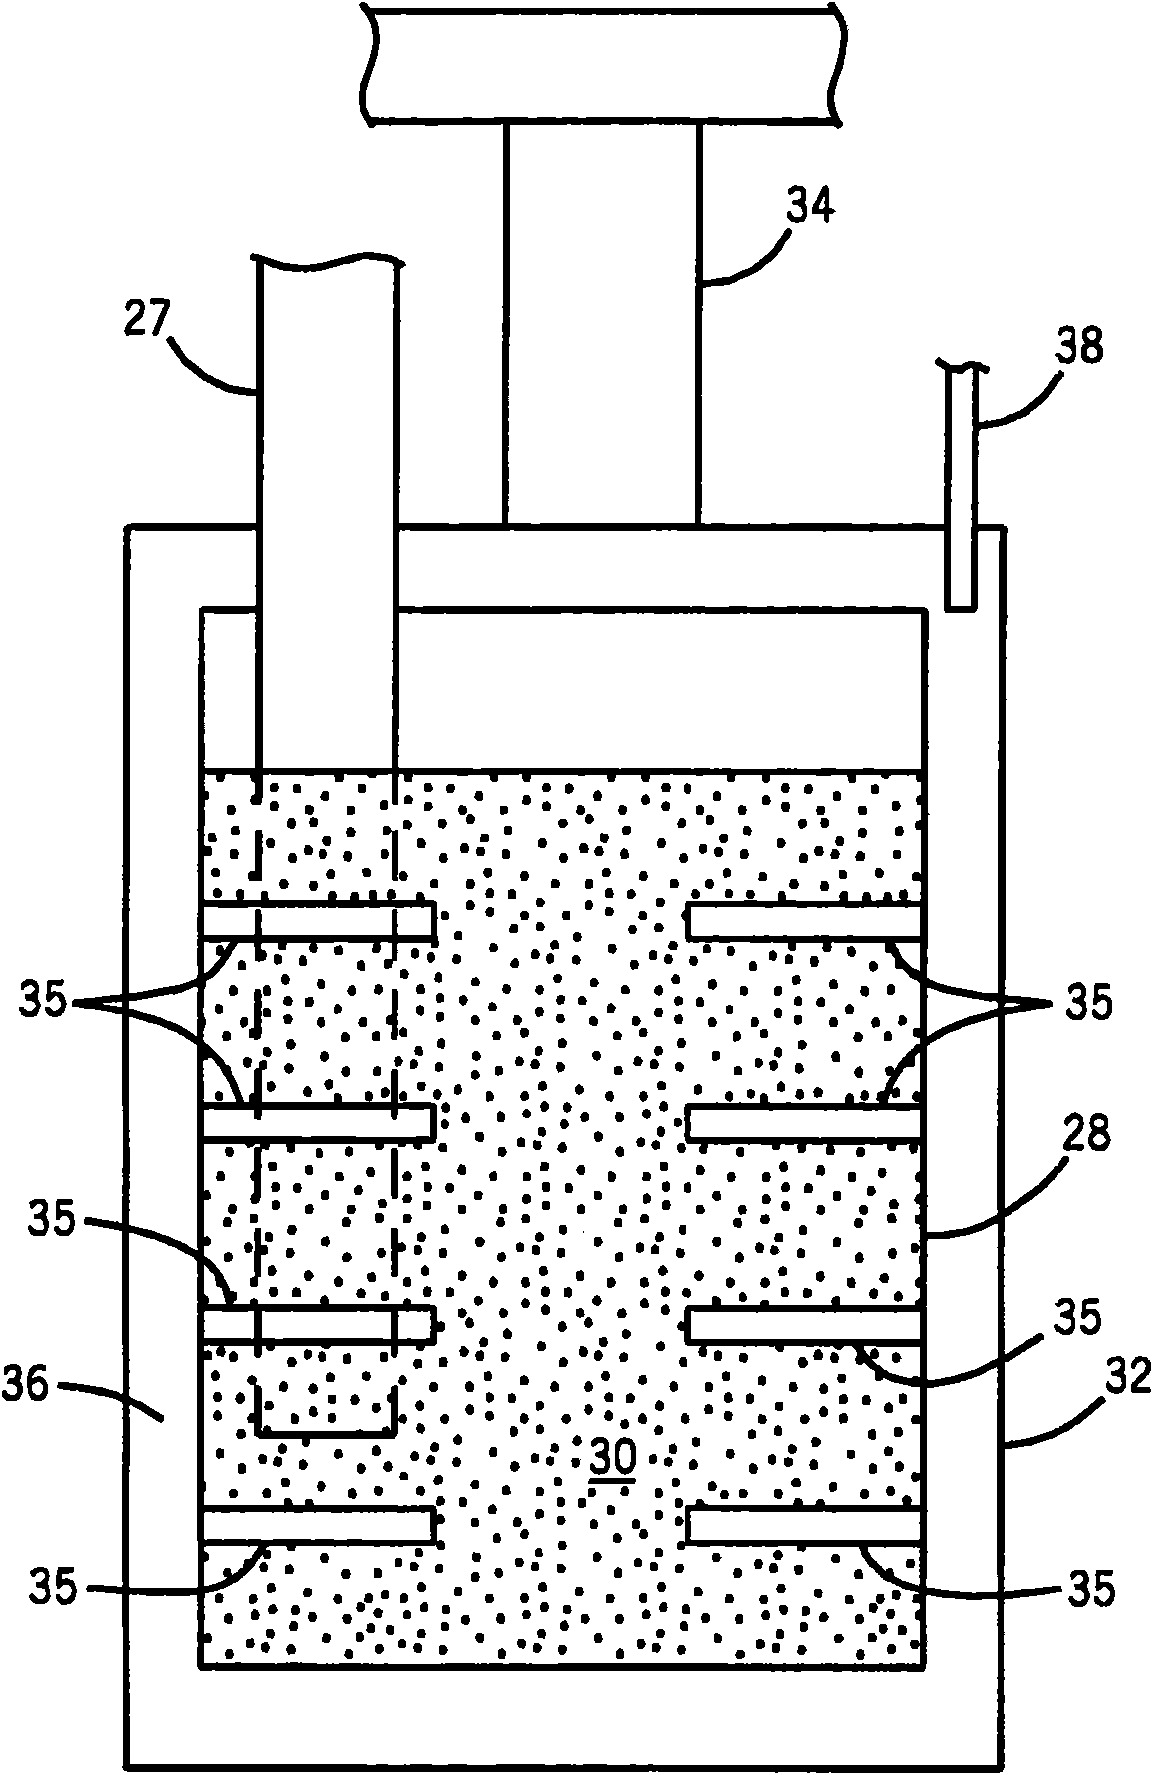 Sorption pump with integrated thermal switch